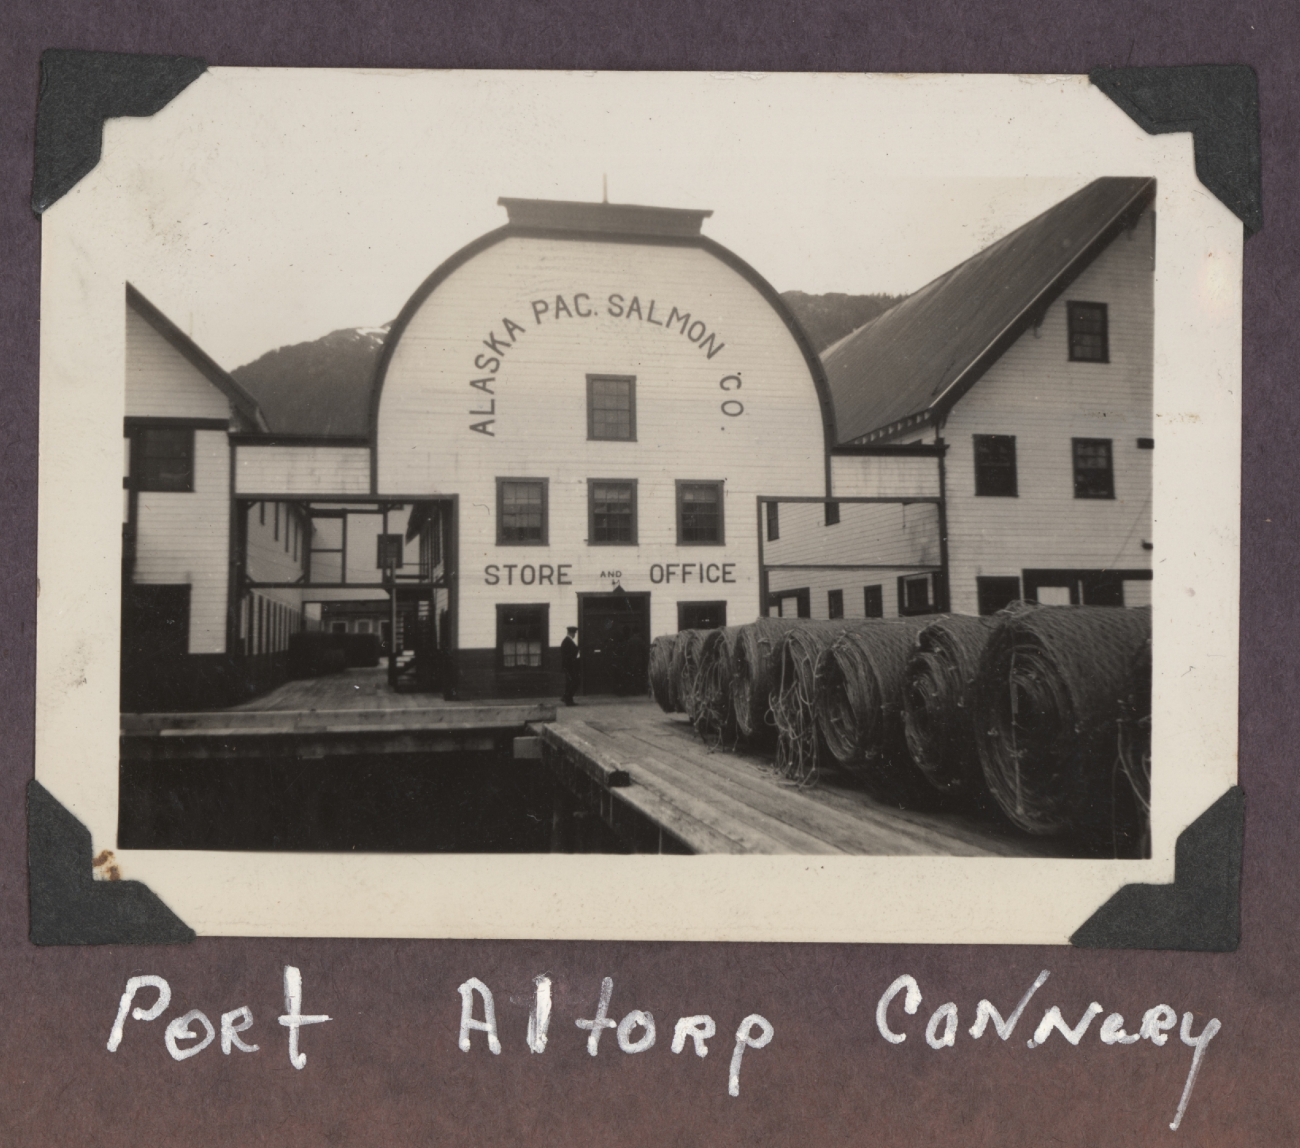 Port Althorp Cannery